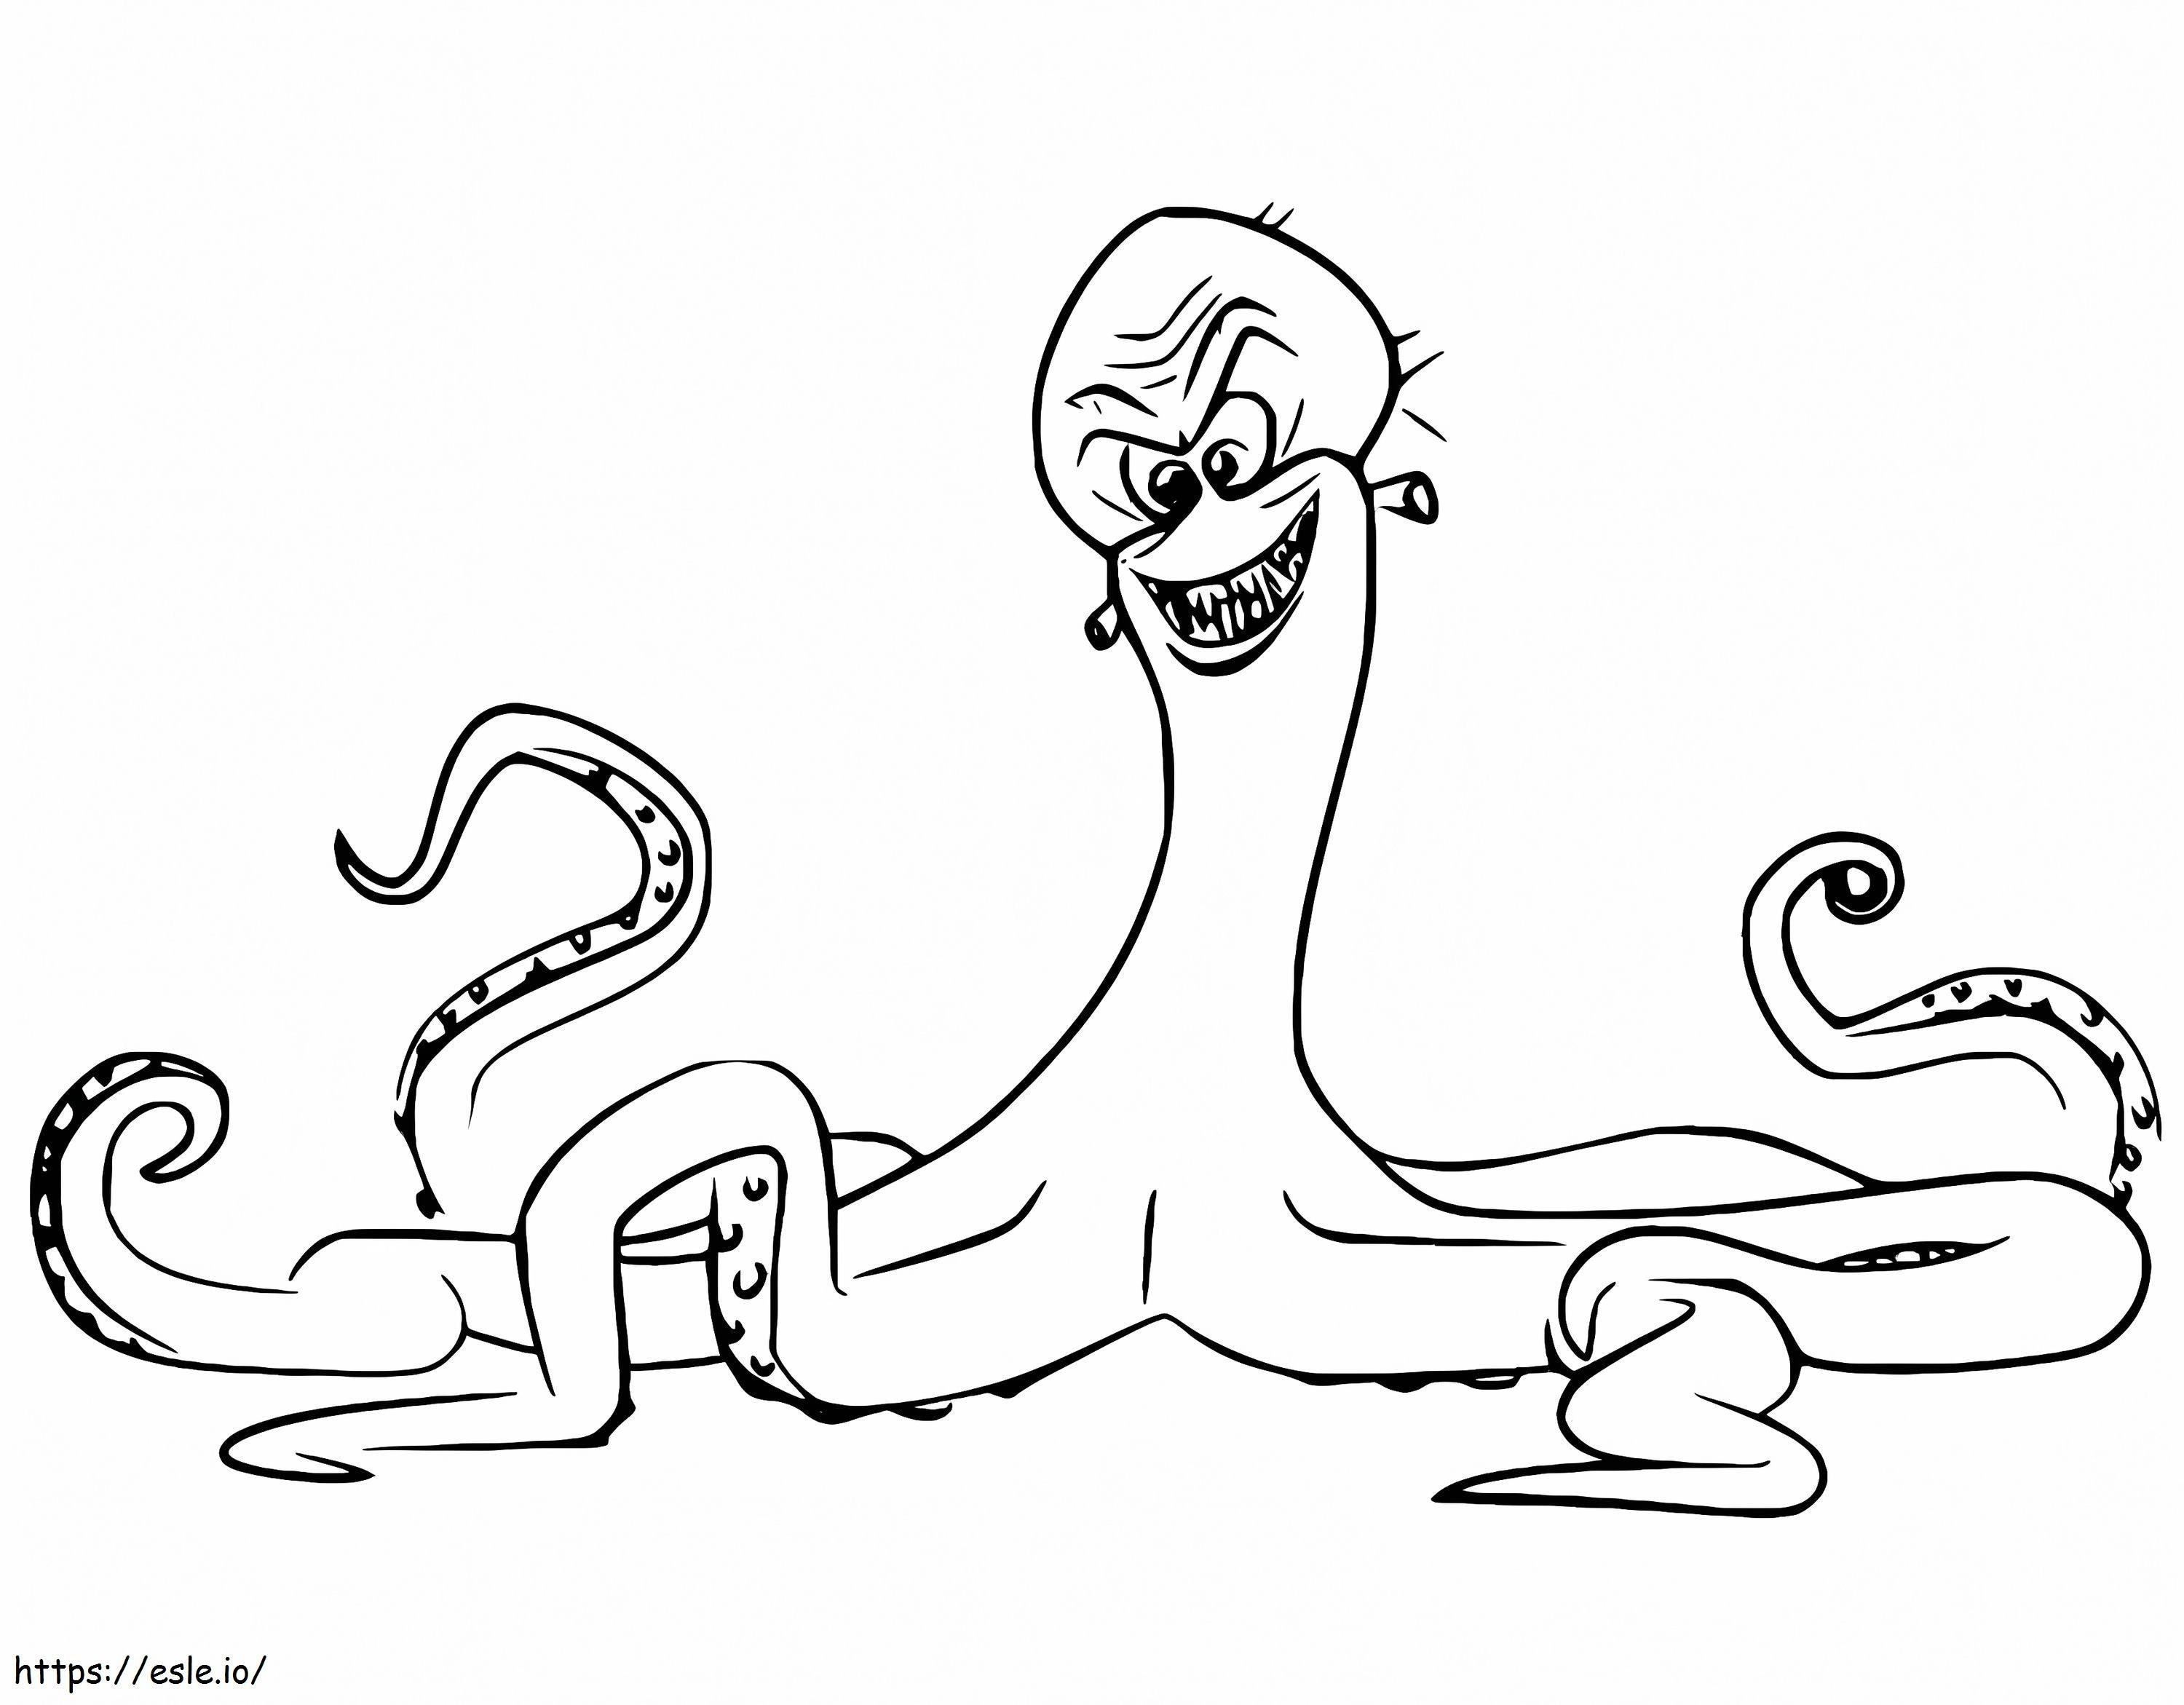 Dave The Octopus coloring page